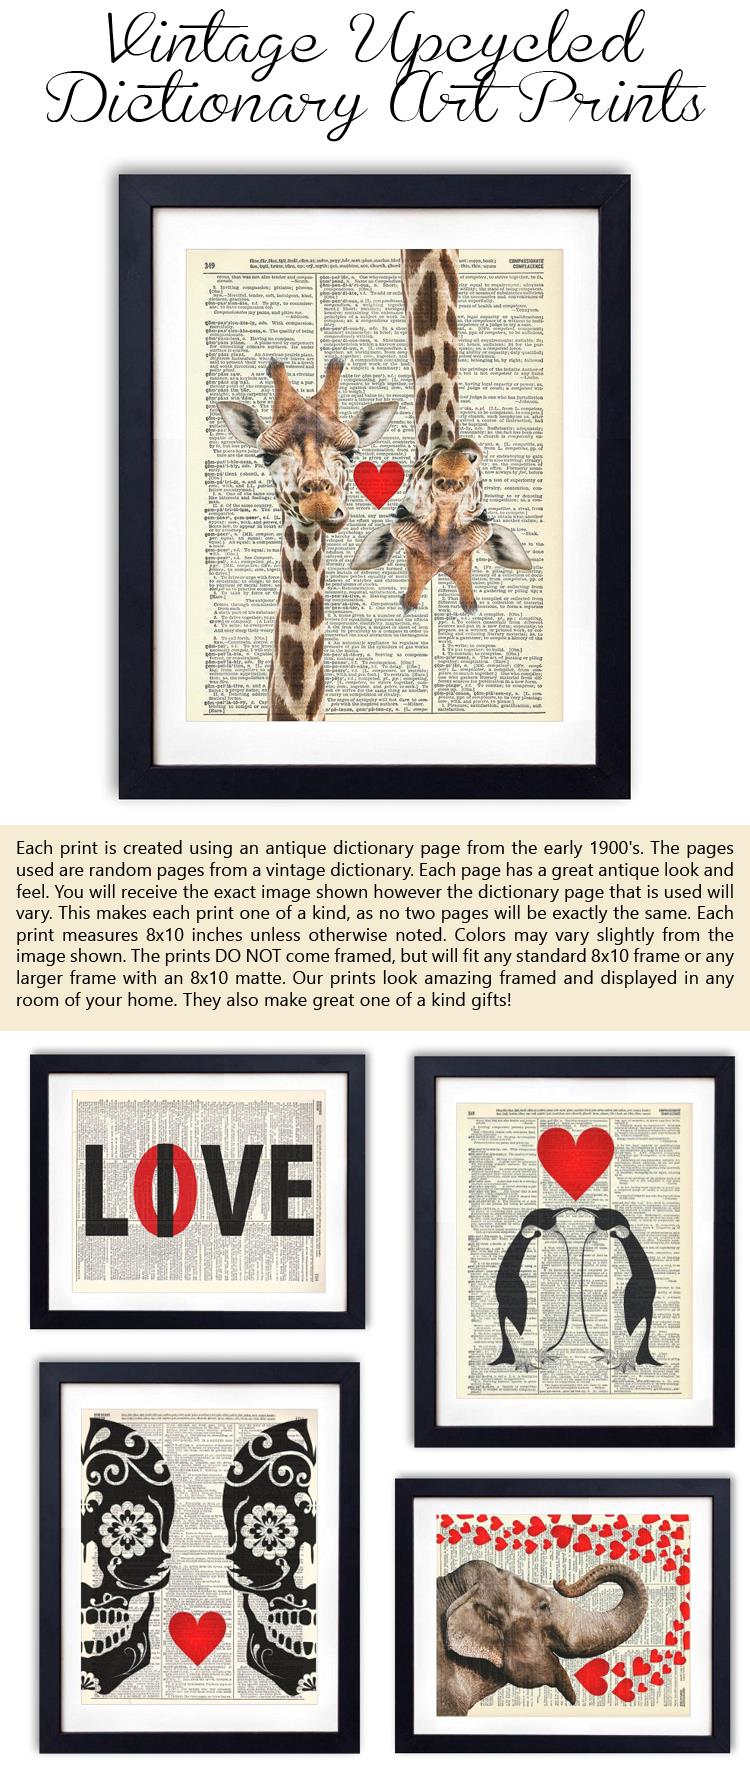 Vintage Upcycled Dictionary Art Print